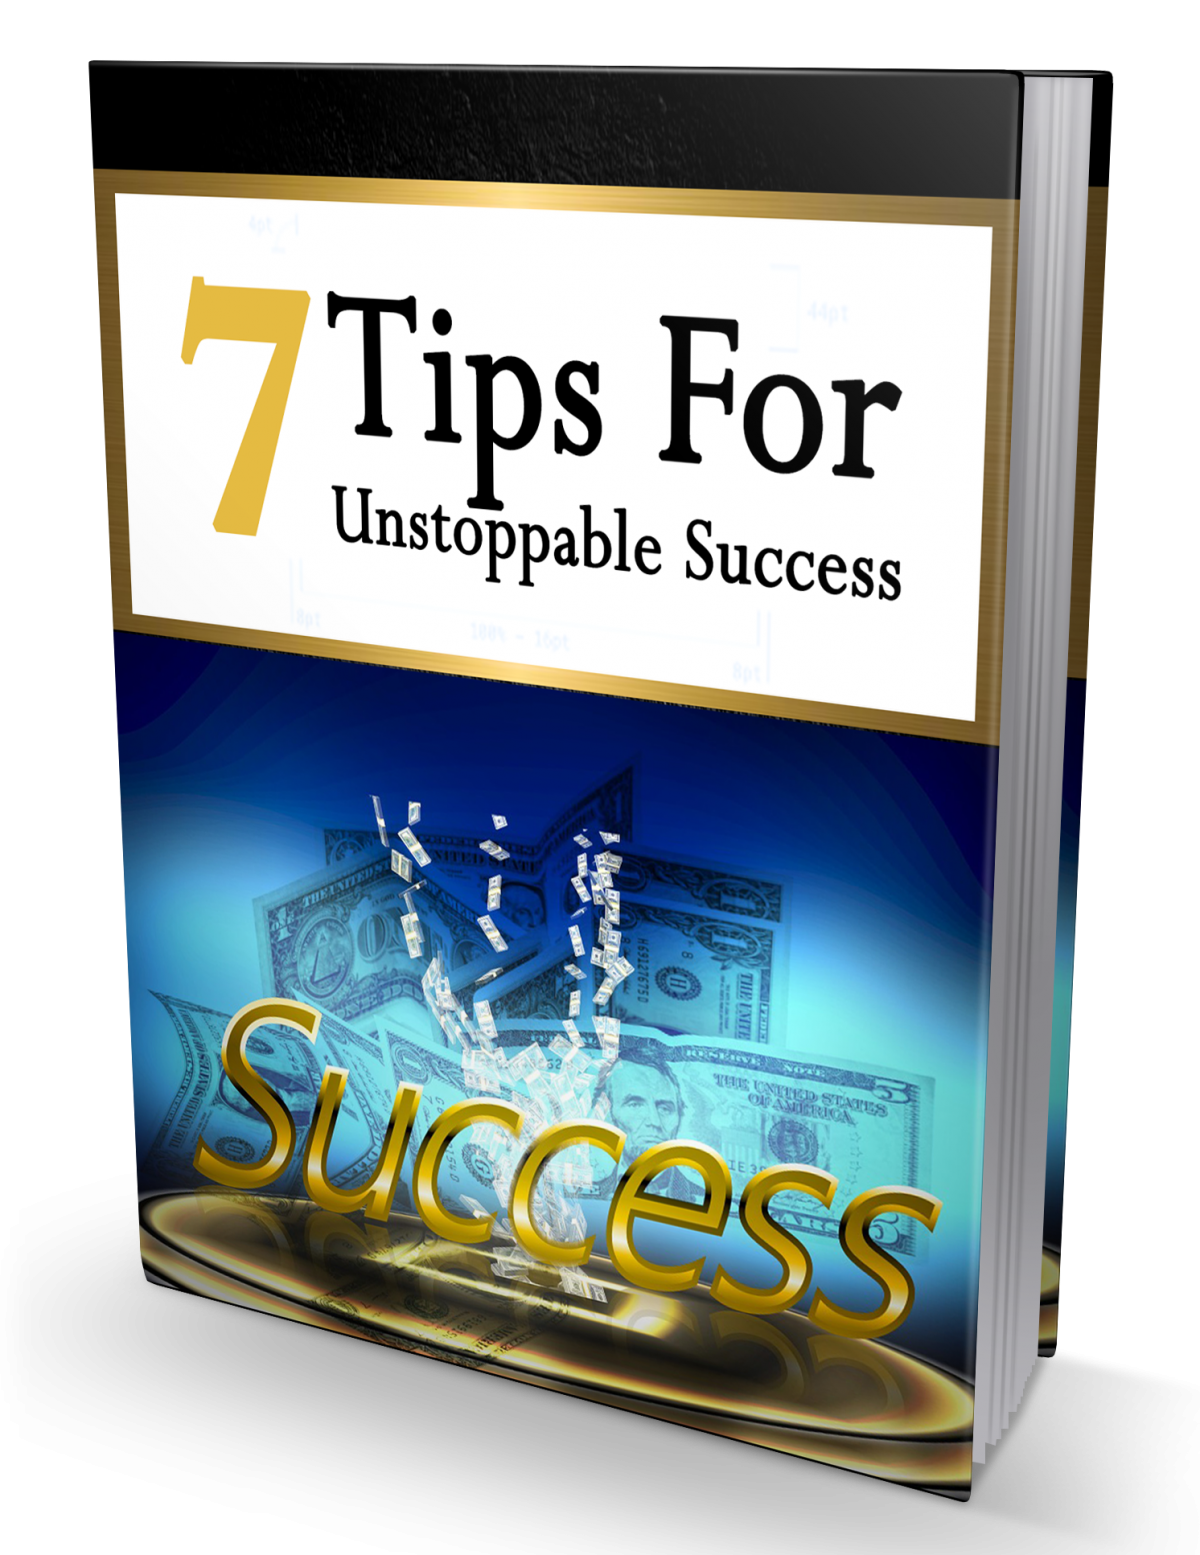 7 Tips for Unstoppable Success